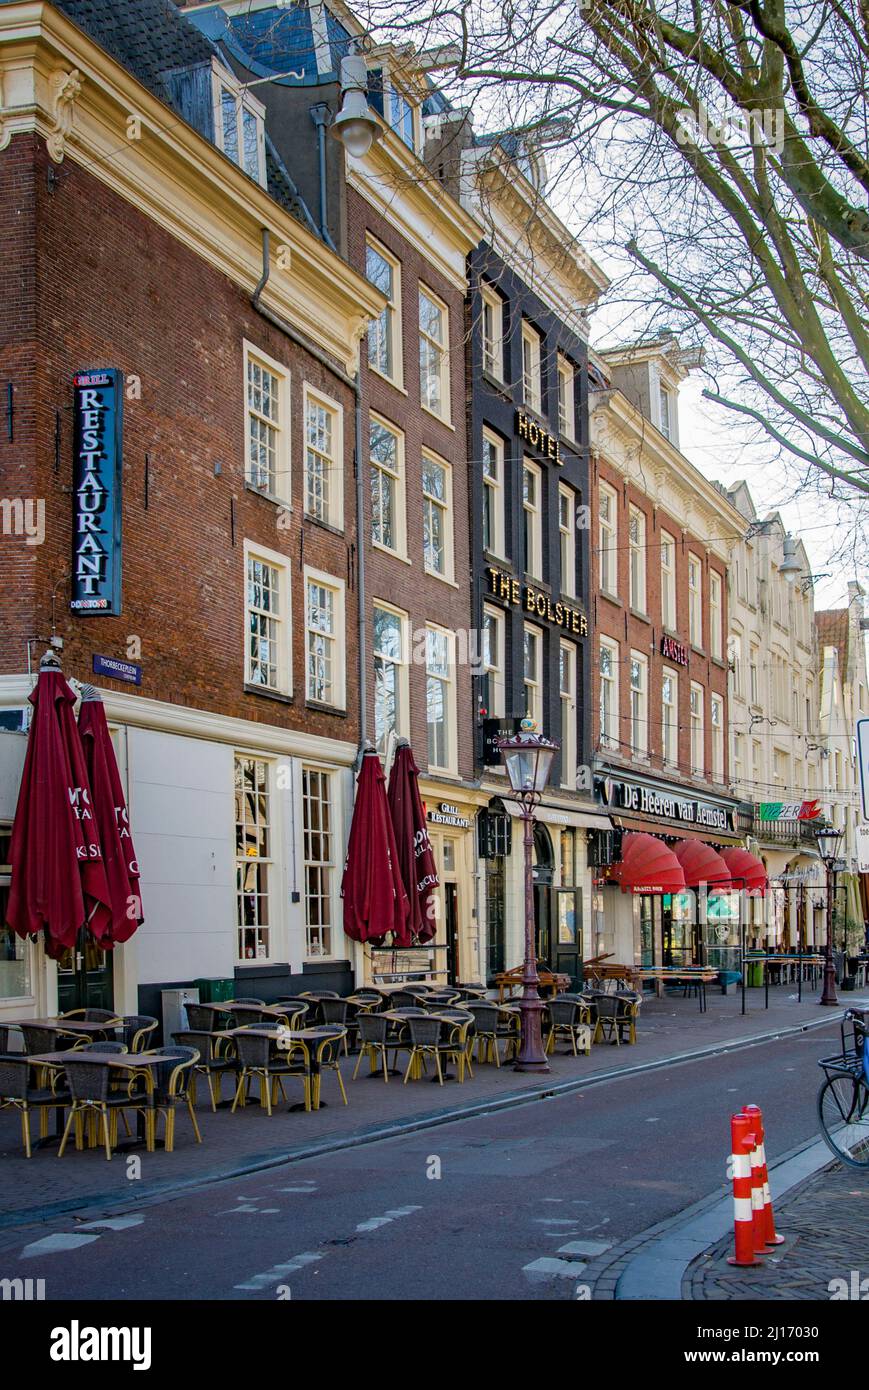 AMSTERDAM, NETHERLANDS. MARCH 19, 2022. Rembrandt square. Hotels and cafes in the city center. Stock Photo